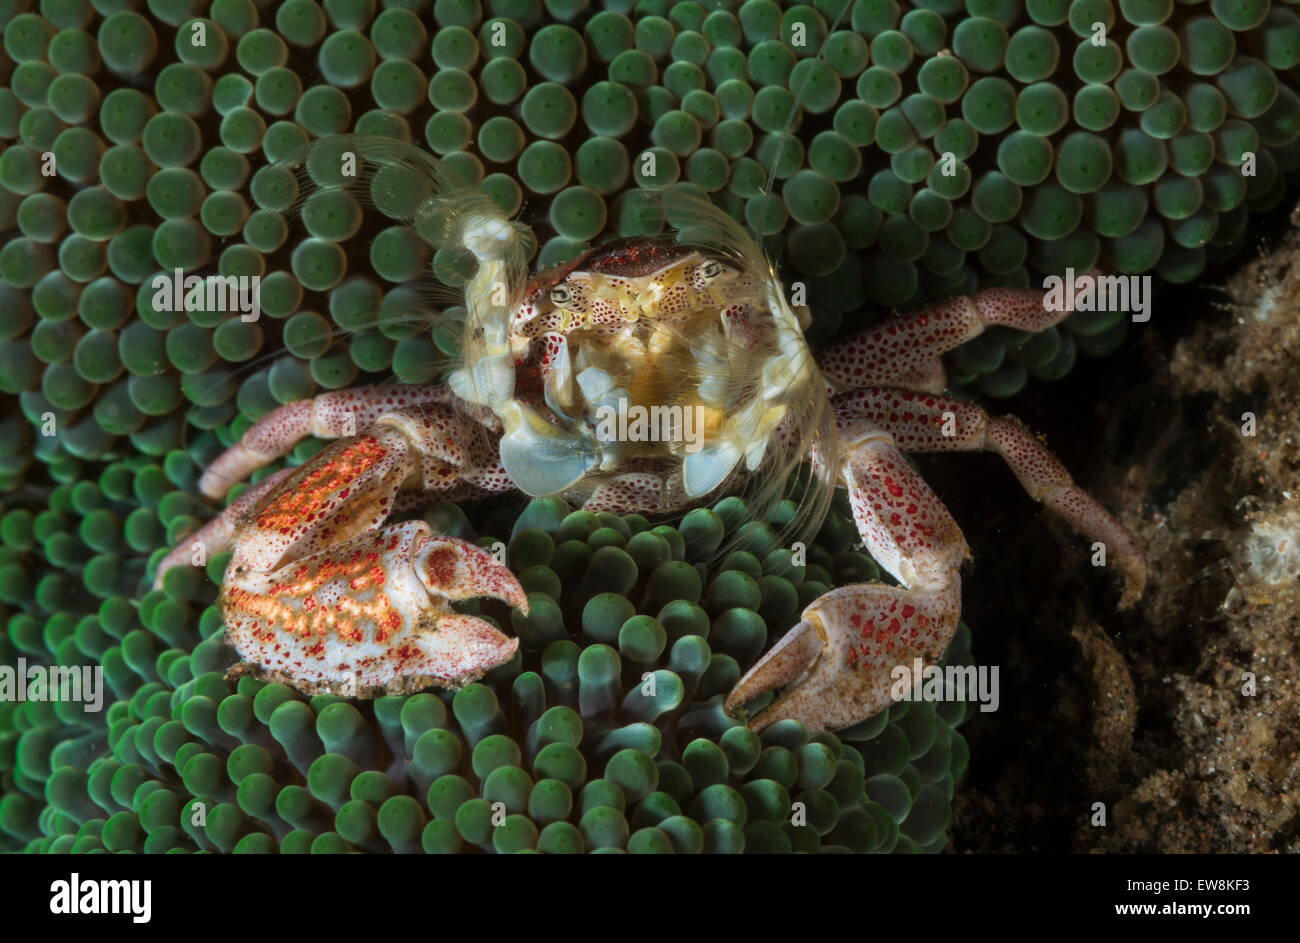 Porcelain crab hiding in an anemone Stock Photo